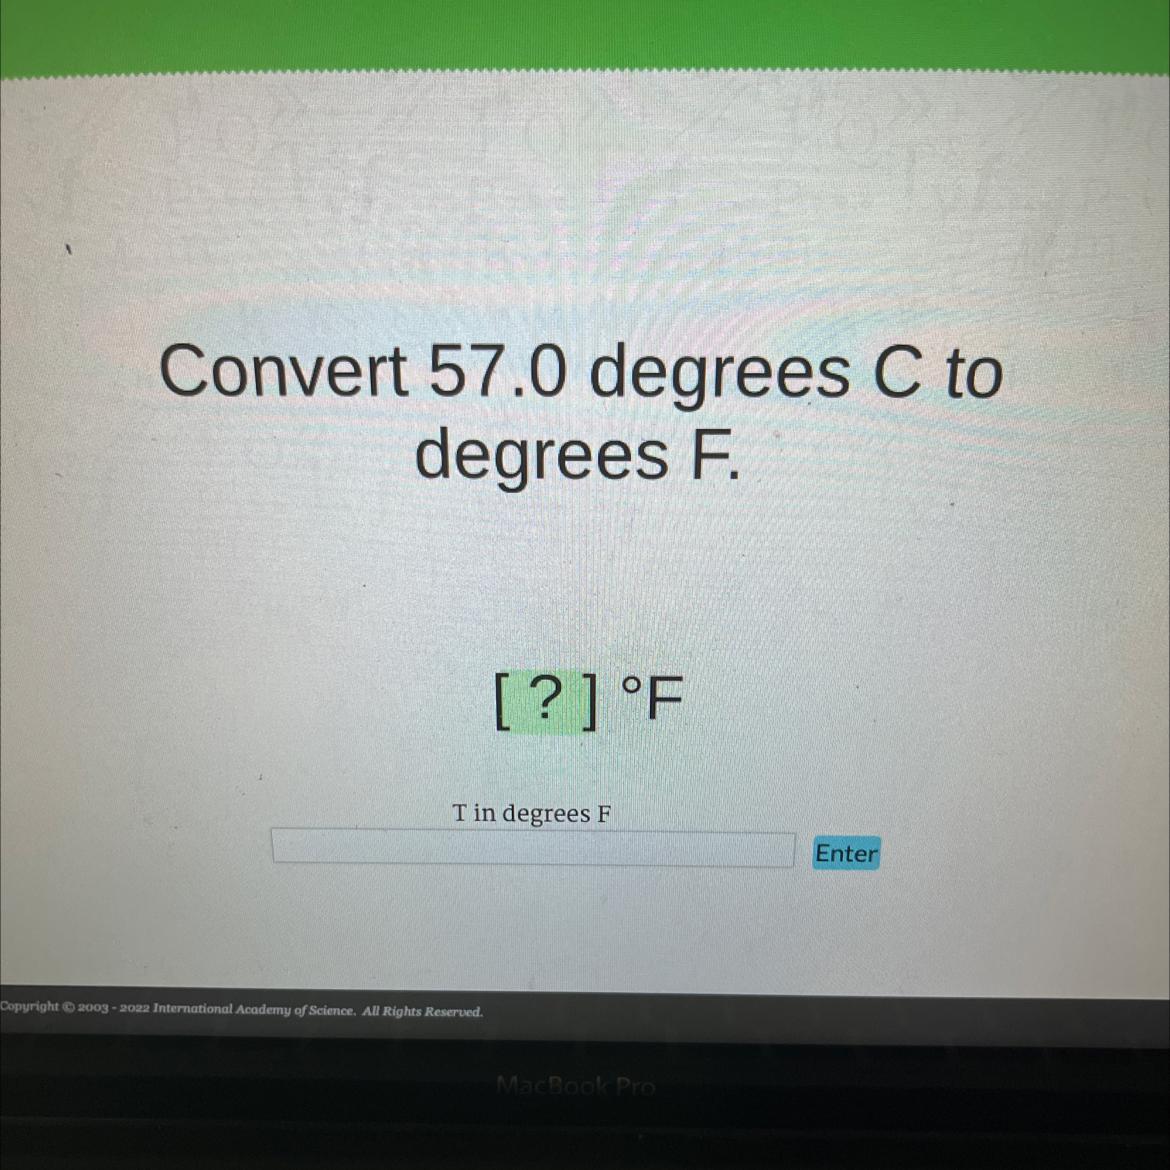 Convert 57.0 Degrees C Todegrees F.[?] FT In Degrees F